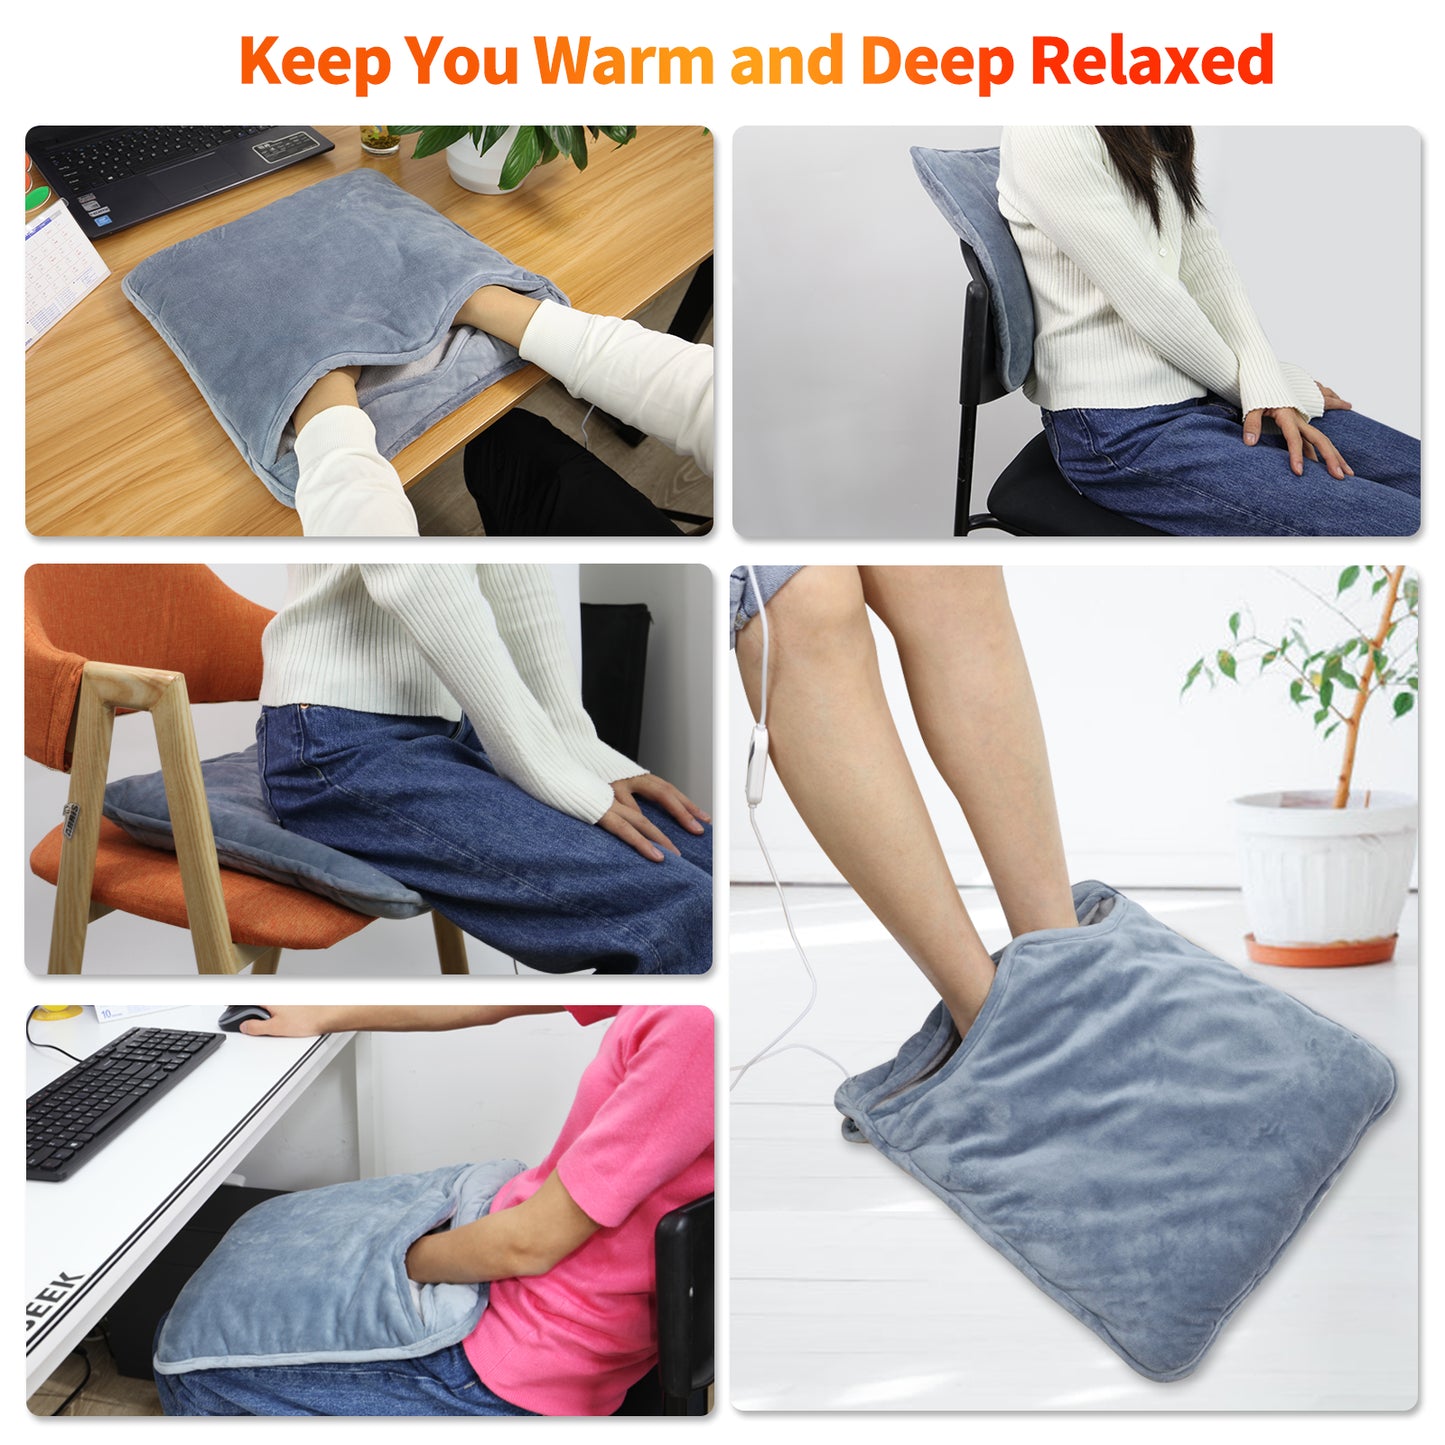 ARRIS Electric Heated Foot Warmers for Men and Women Foot Heating Pad with 3 Temperatures